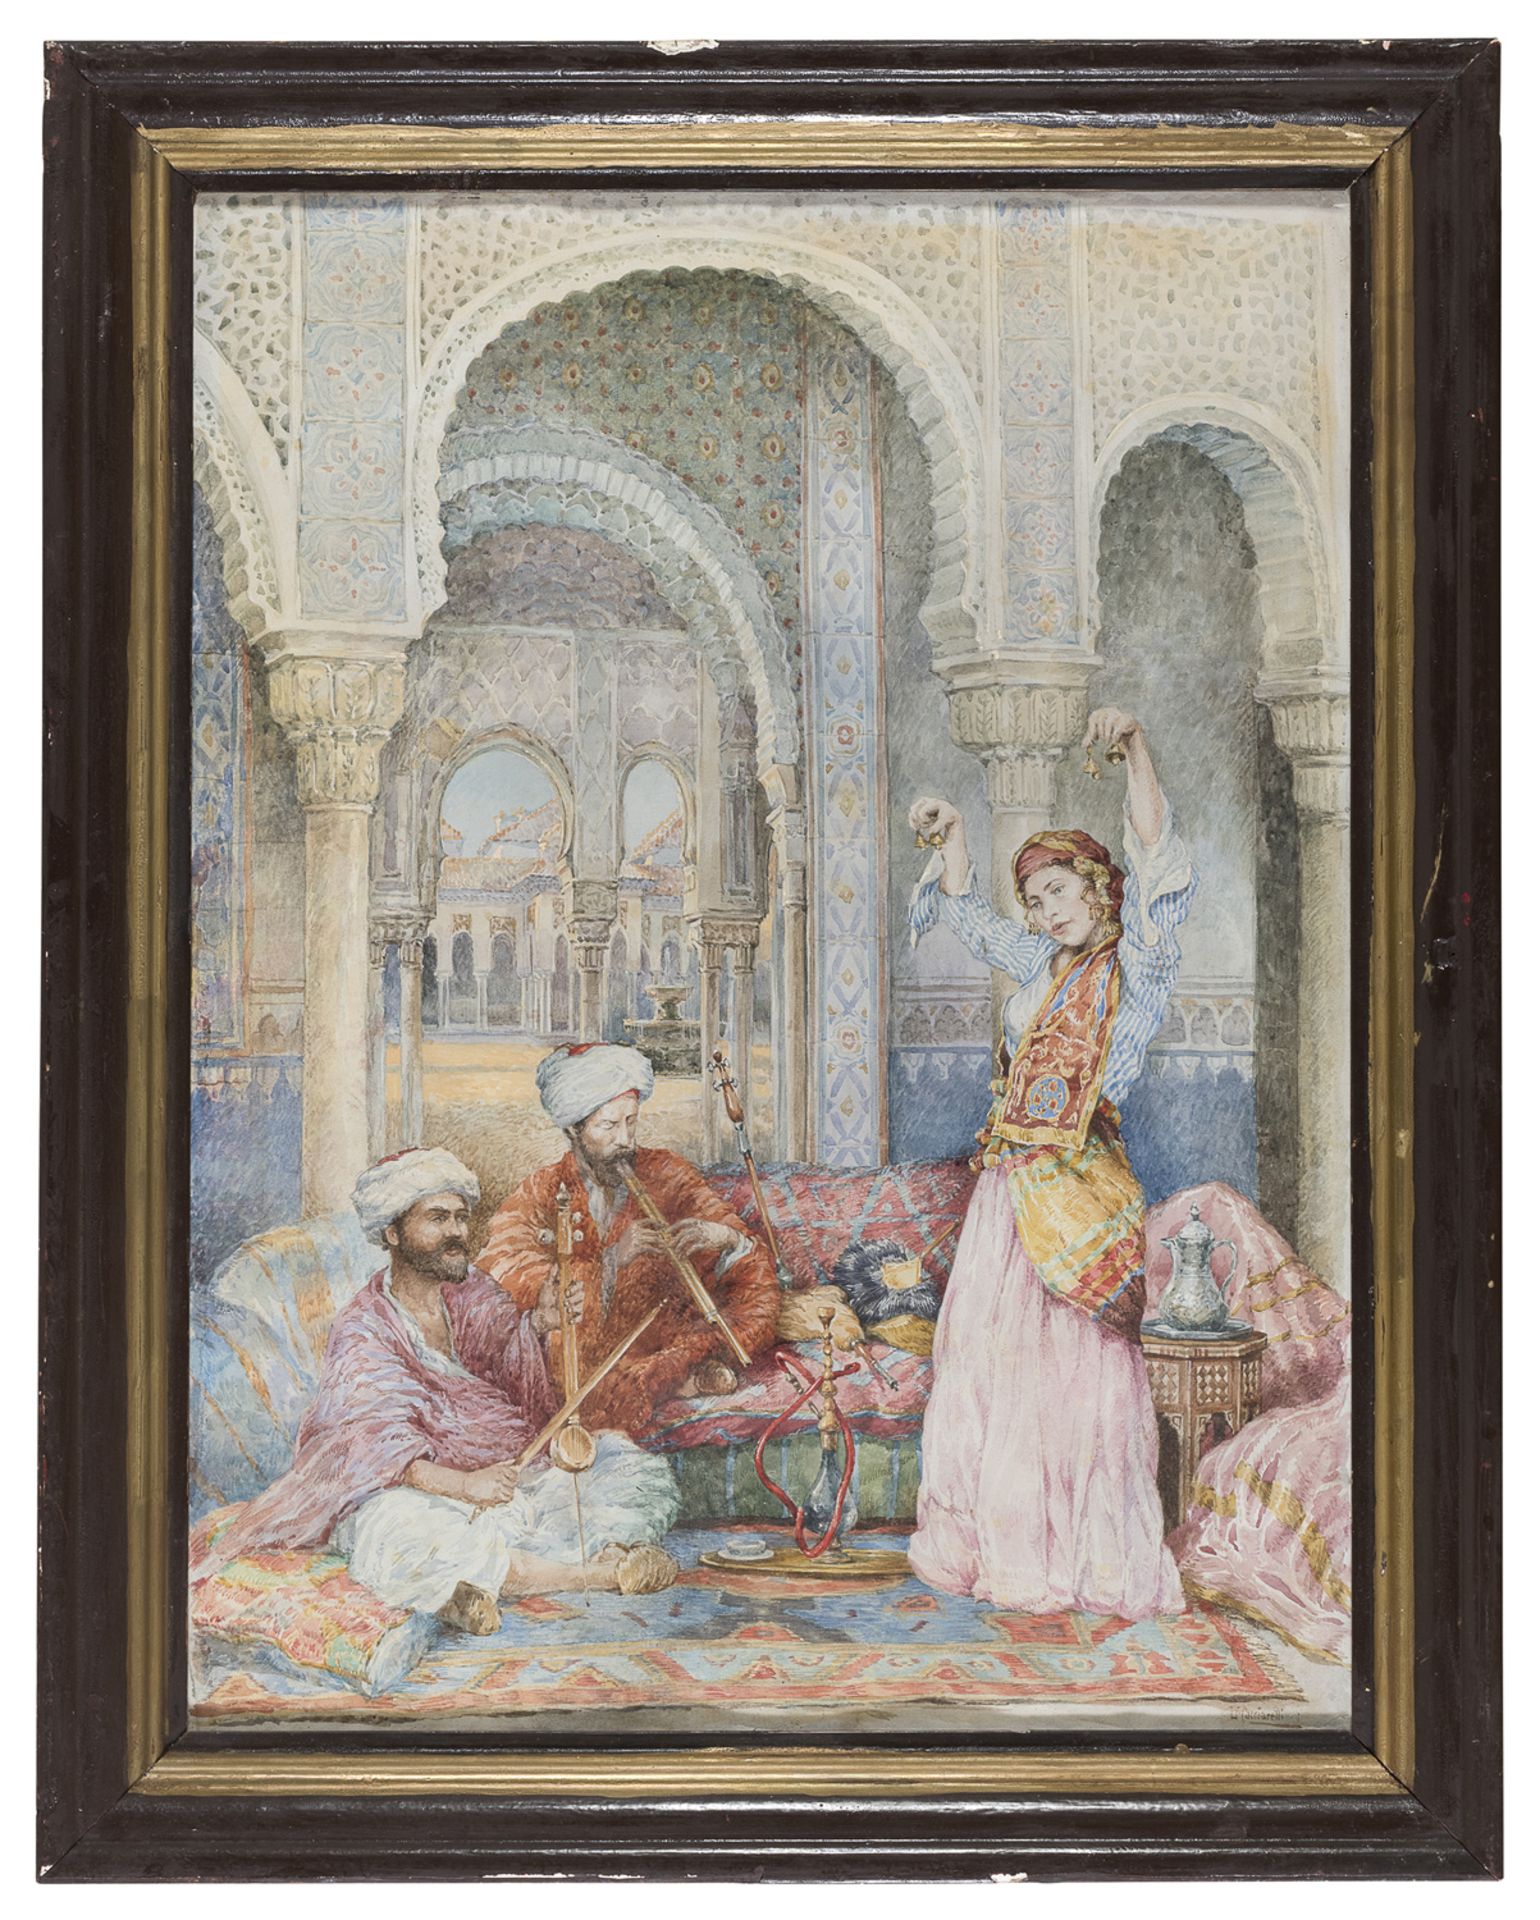 WATERCOLOR OF AN ODALISQUE BY UMBERTO CACCIARELLI